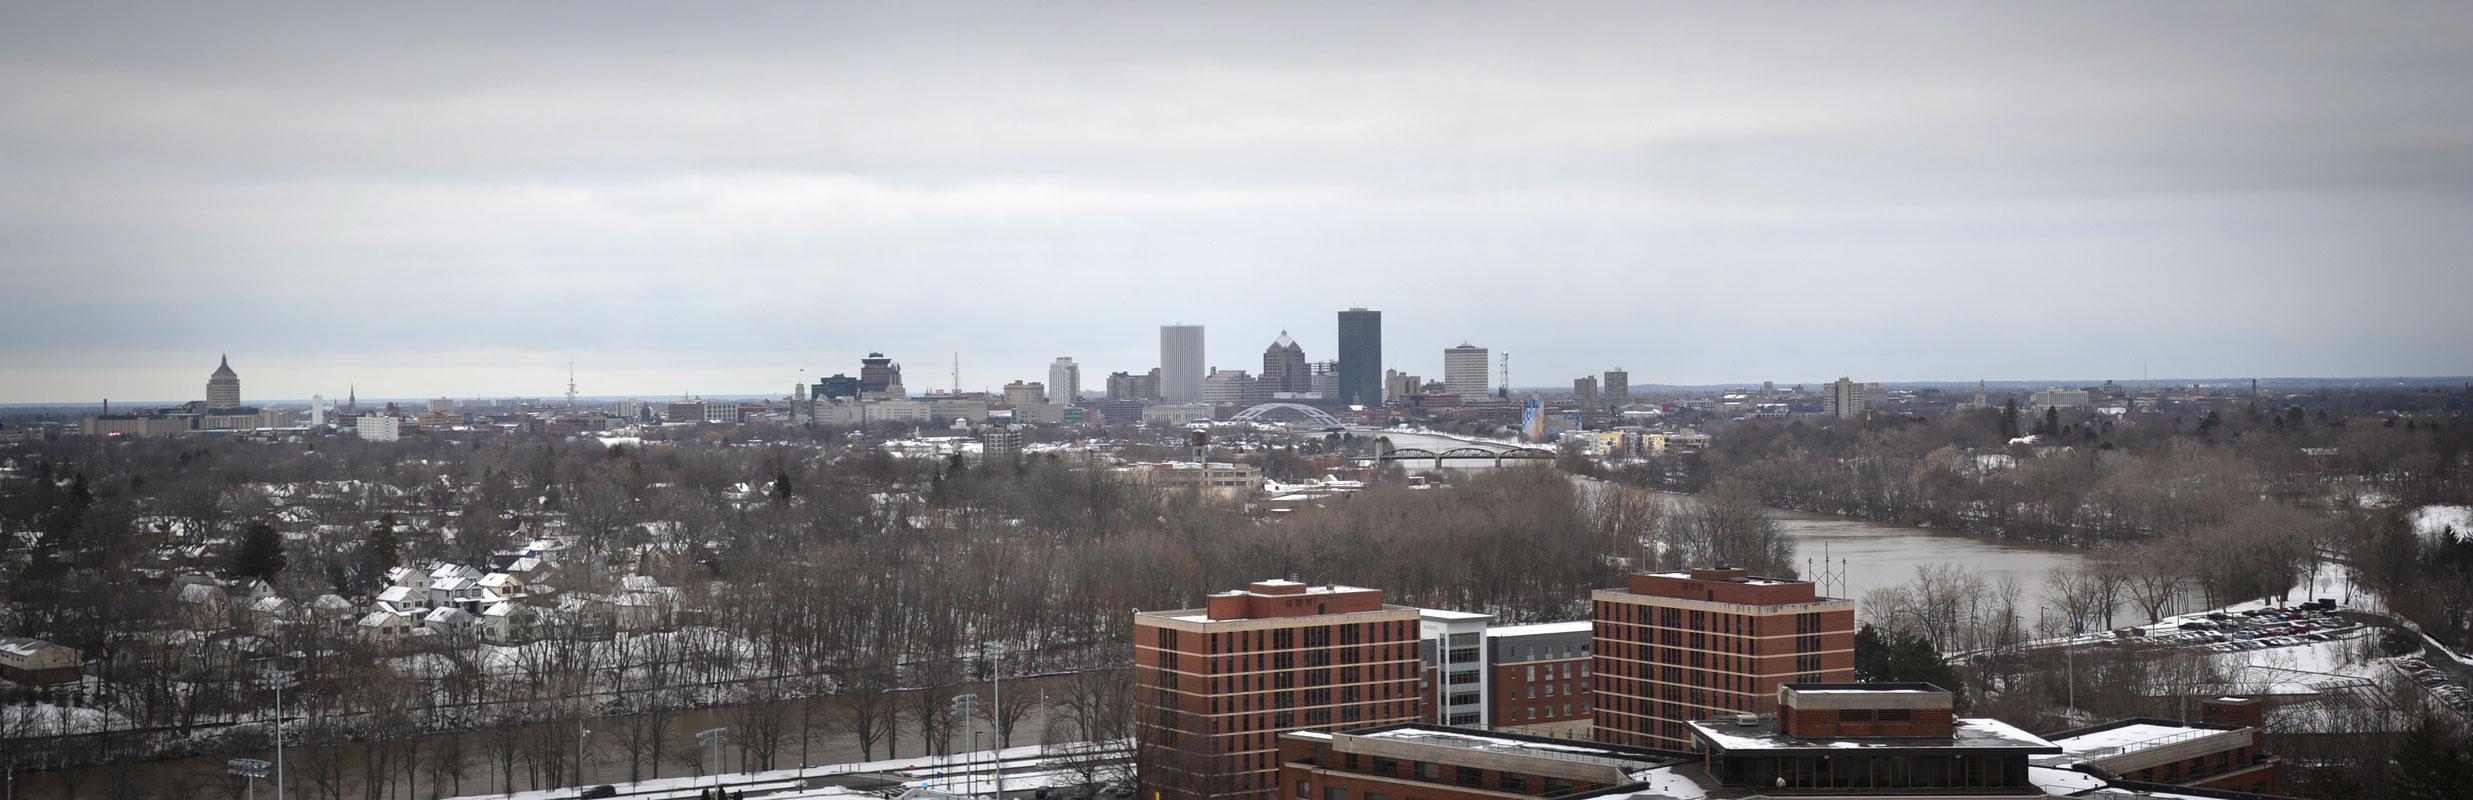 Panorama view of Rochester skyline from top of University of Rochester Rush Rhees Library. [PHOTO: RochesterSubway.com]